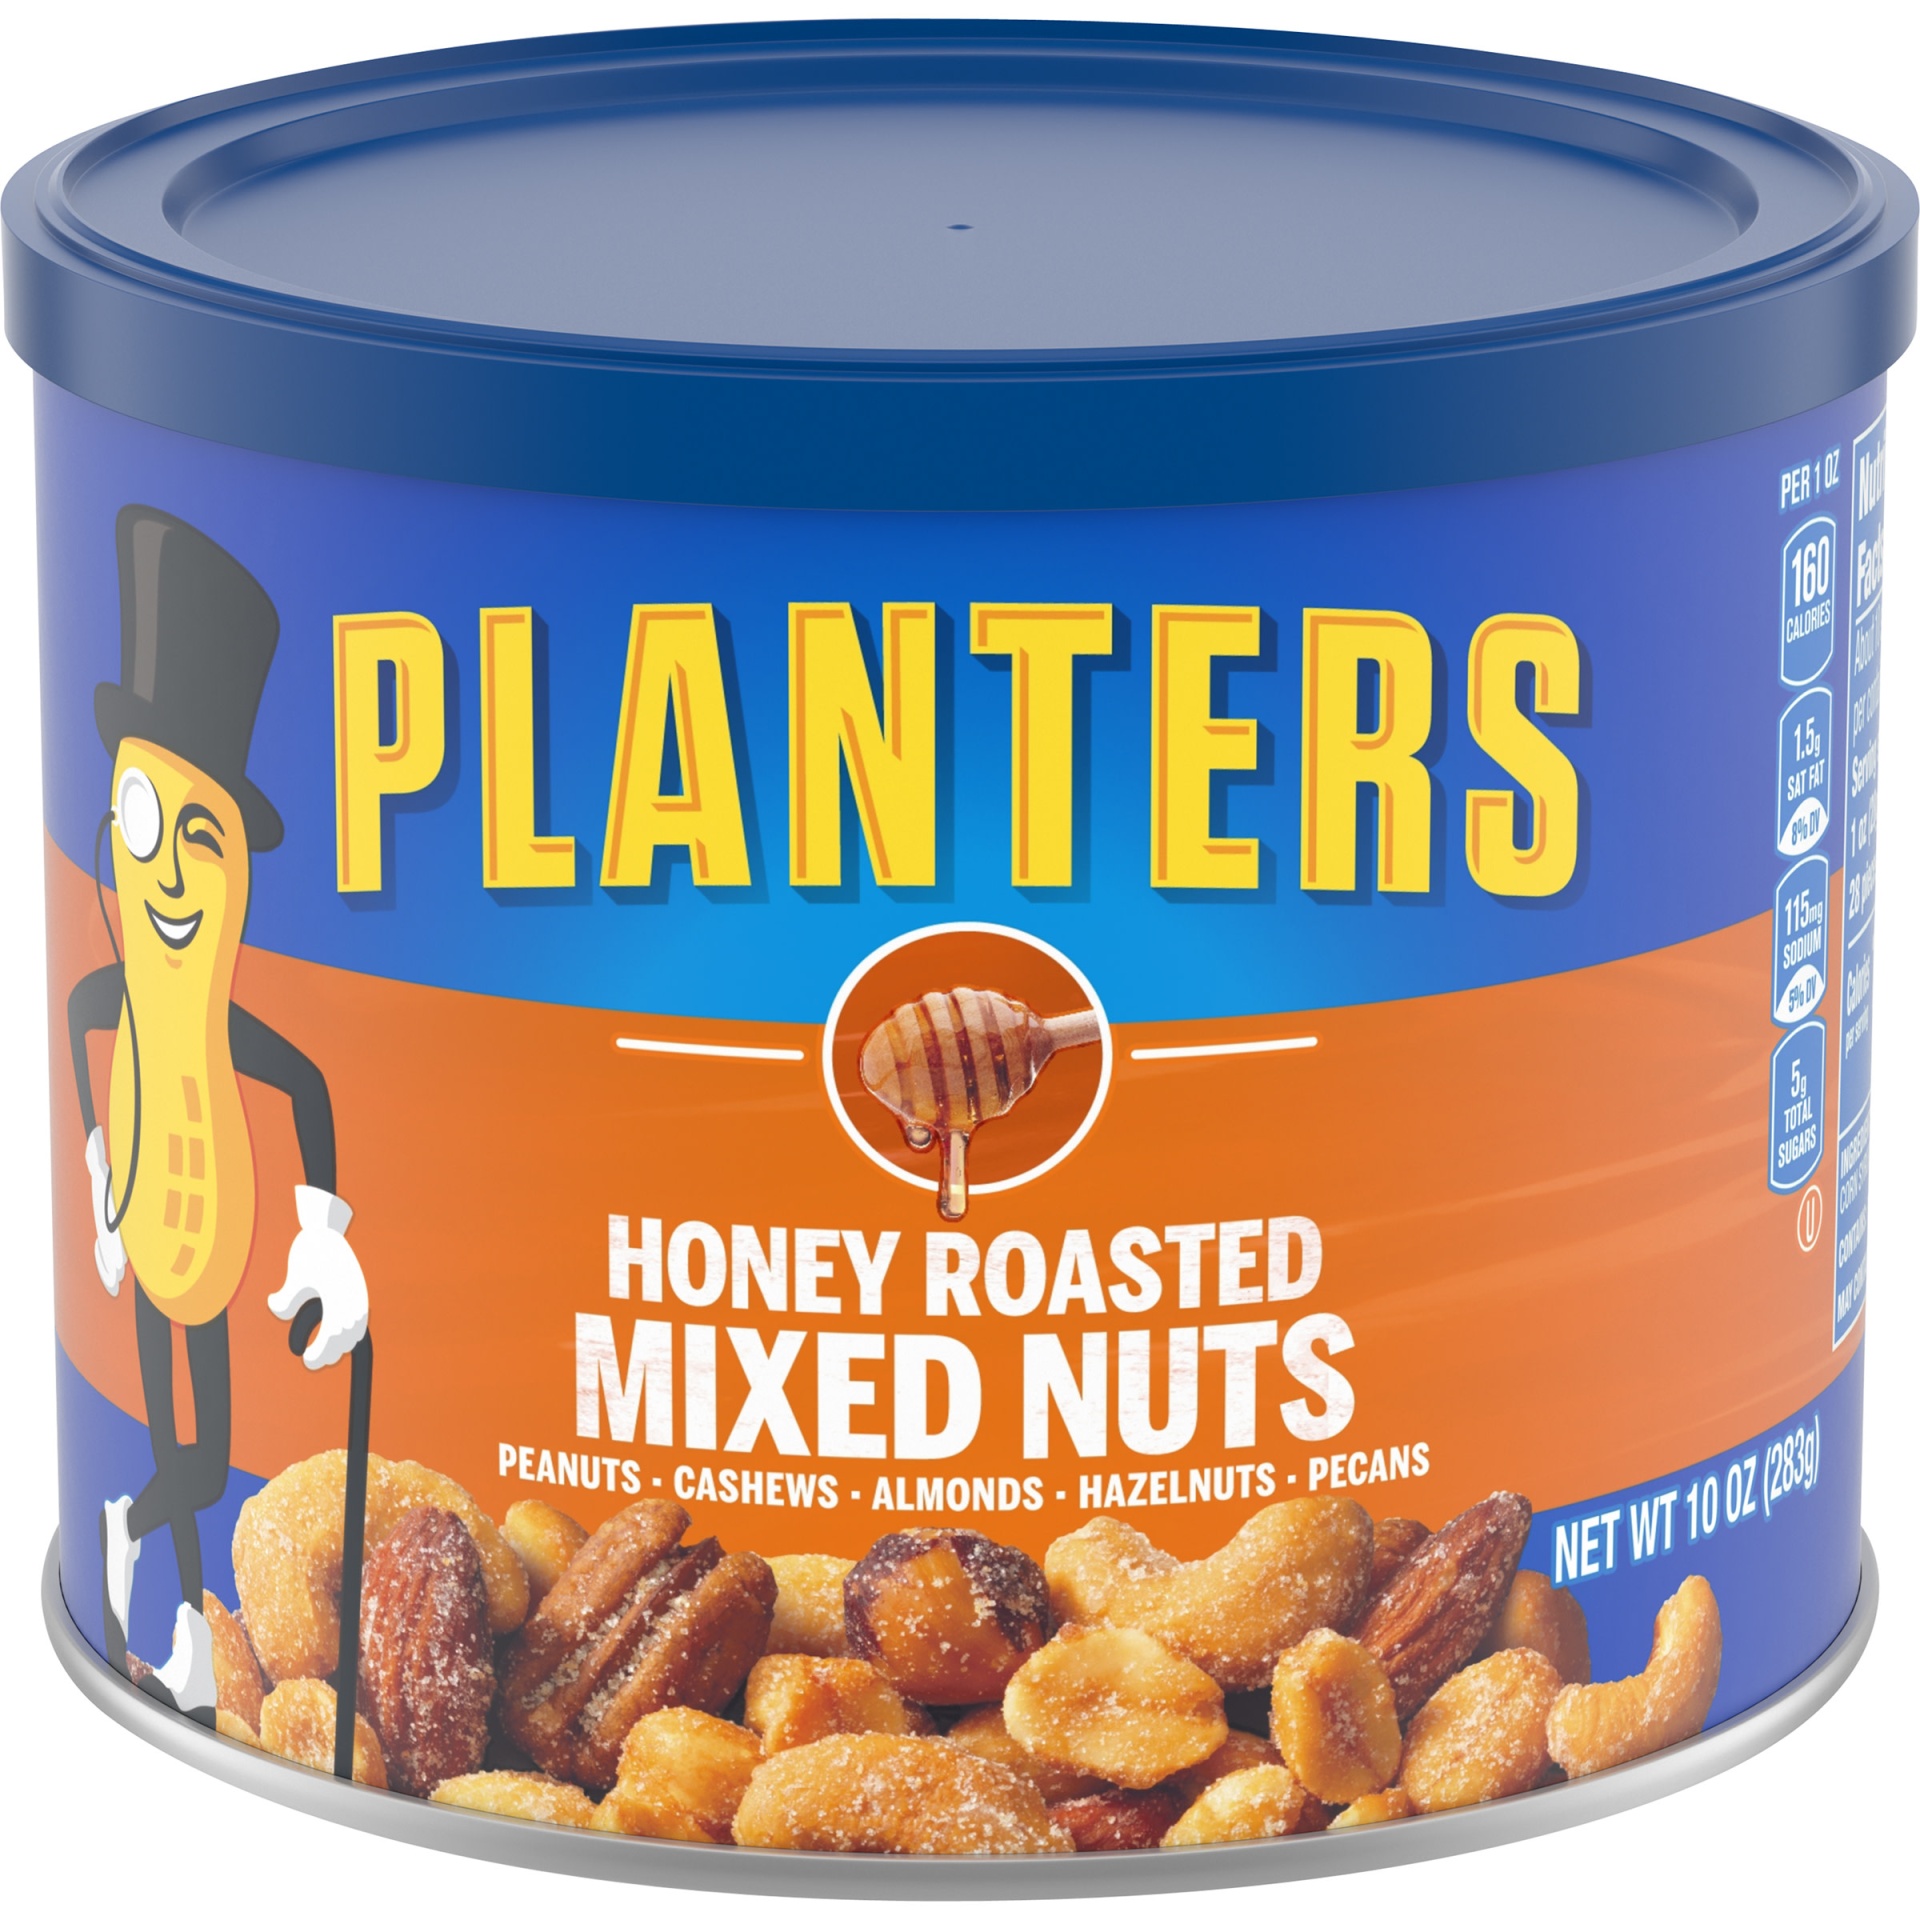 slide 1 of 2, Planters Honey Roasted Mixed Nuts with Peanuts, Cashews, Almonds, Hazelnuts & Pecans, 10 oz